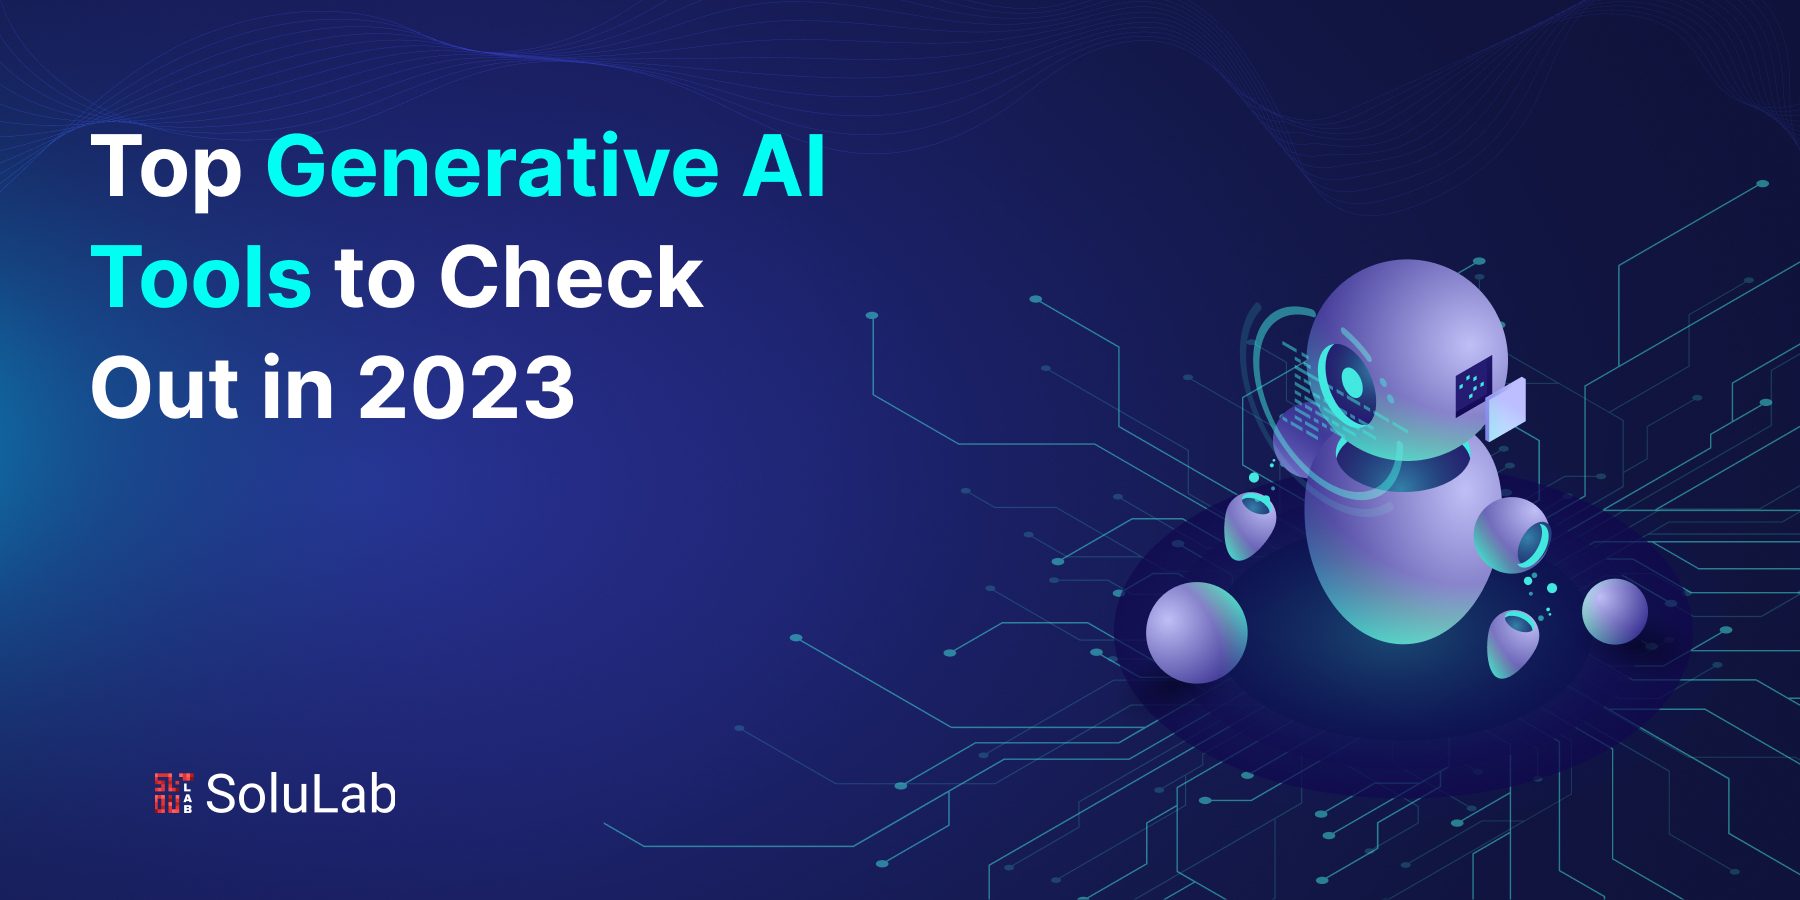 Top Generative AI Tools to Check Out in 2023